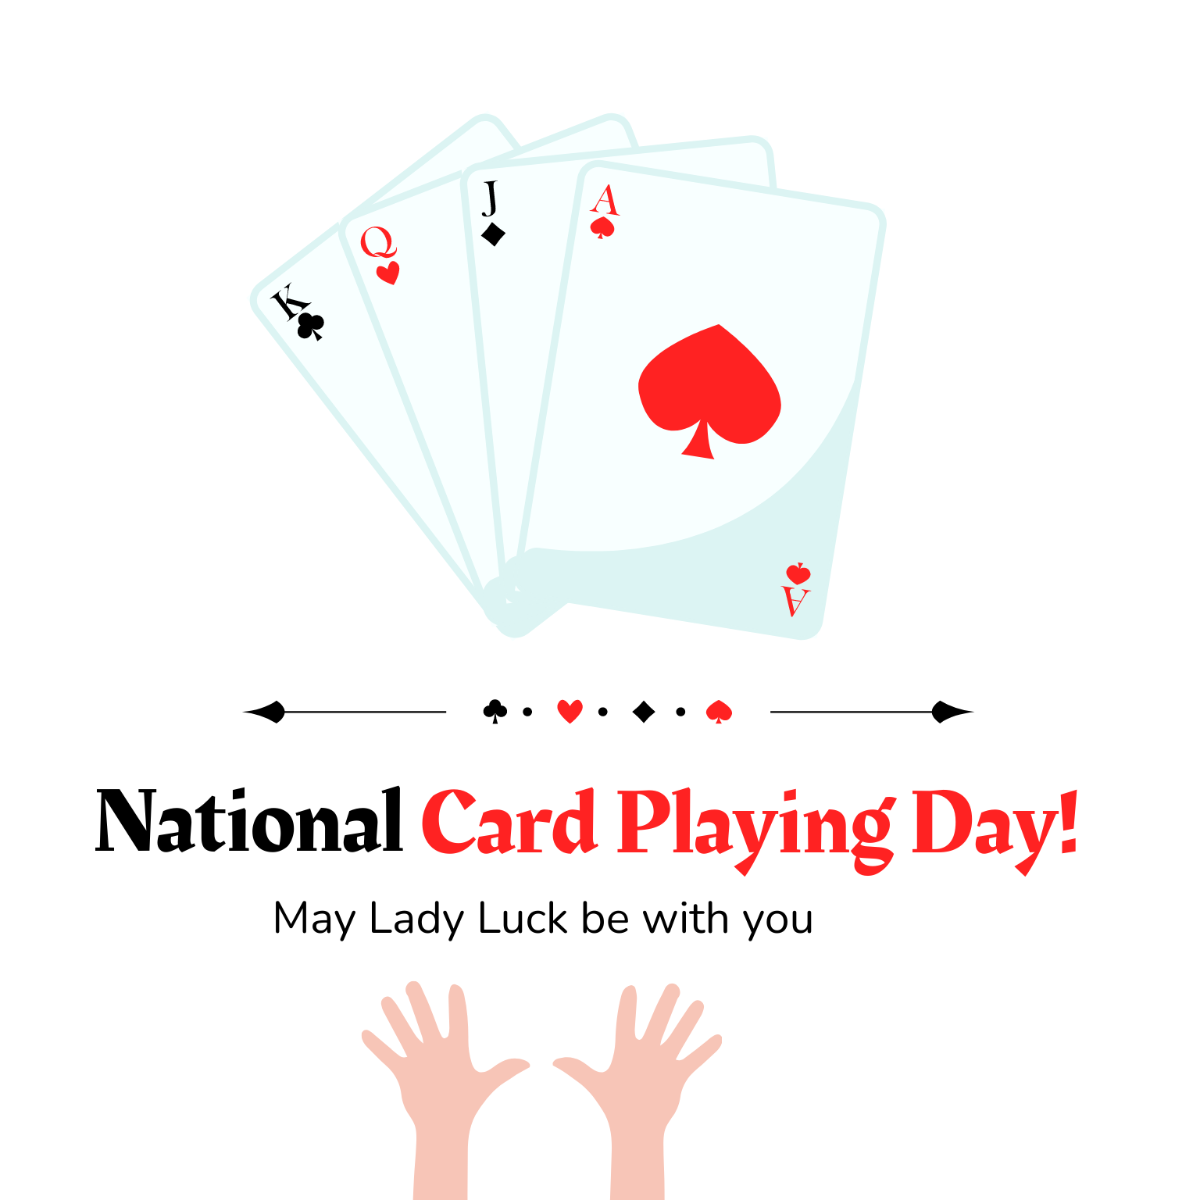 National Card Playing Day Wishes Vector Template